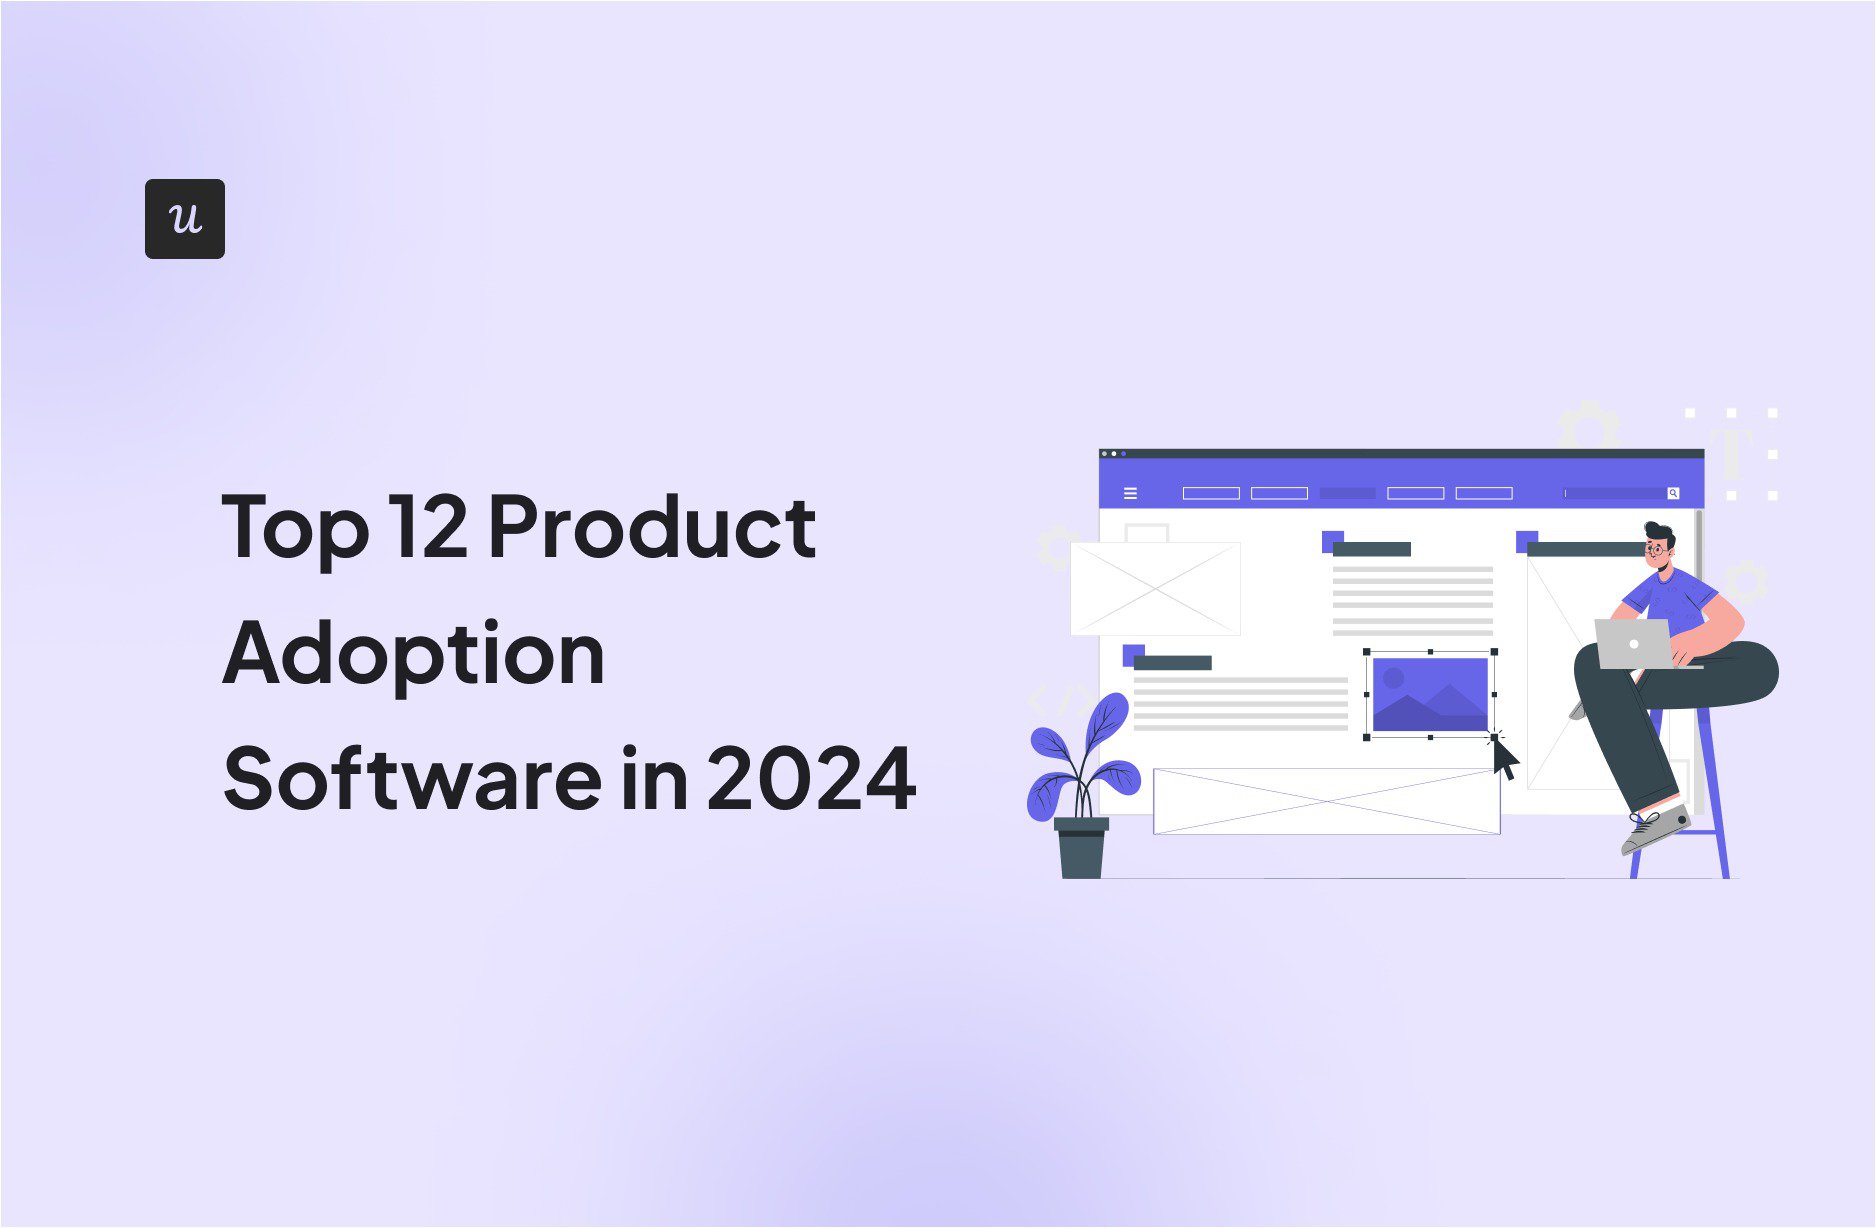 Top 12 Product Adoption Software in 2024 cover